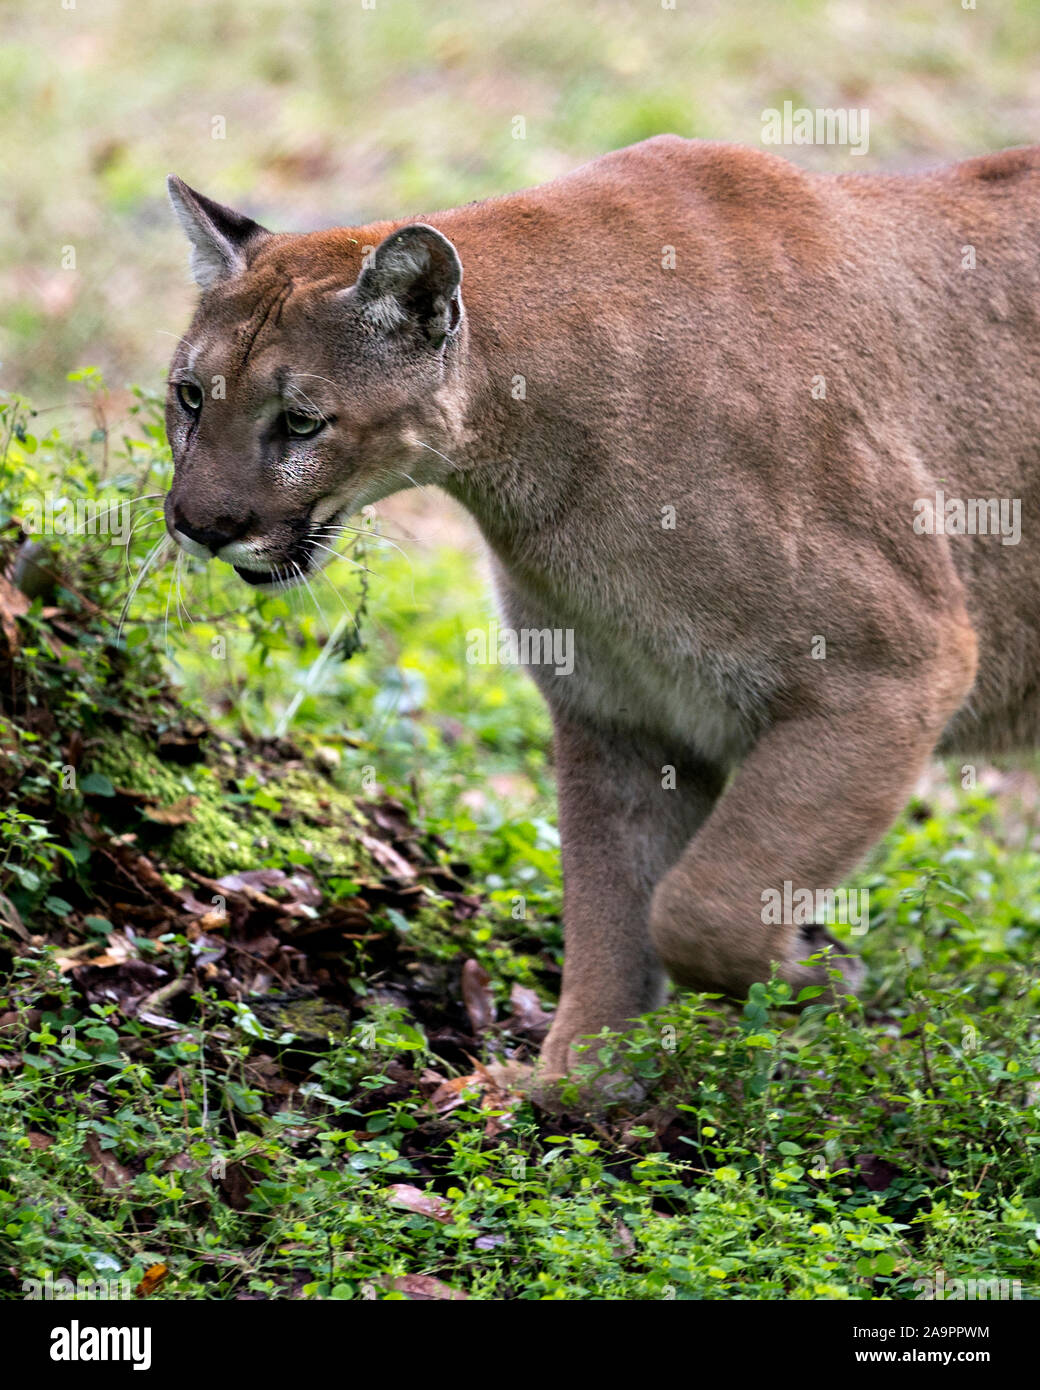 Florida Panther walking in the field enjoying its environment and surrounding while exposing part of its body, head, ears, eyes, nose, paws. Stock Photo